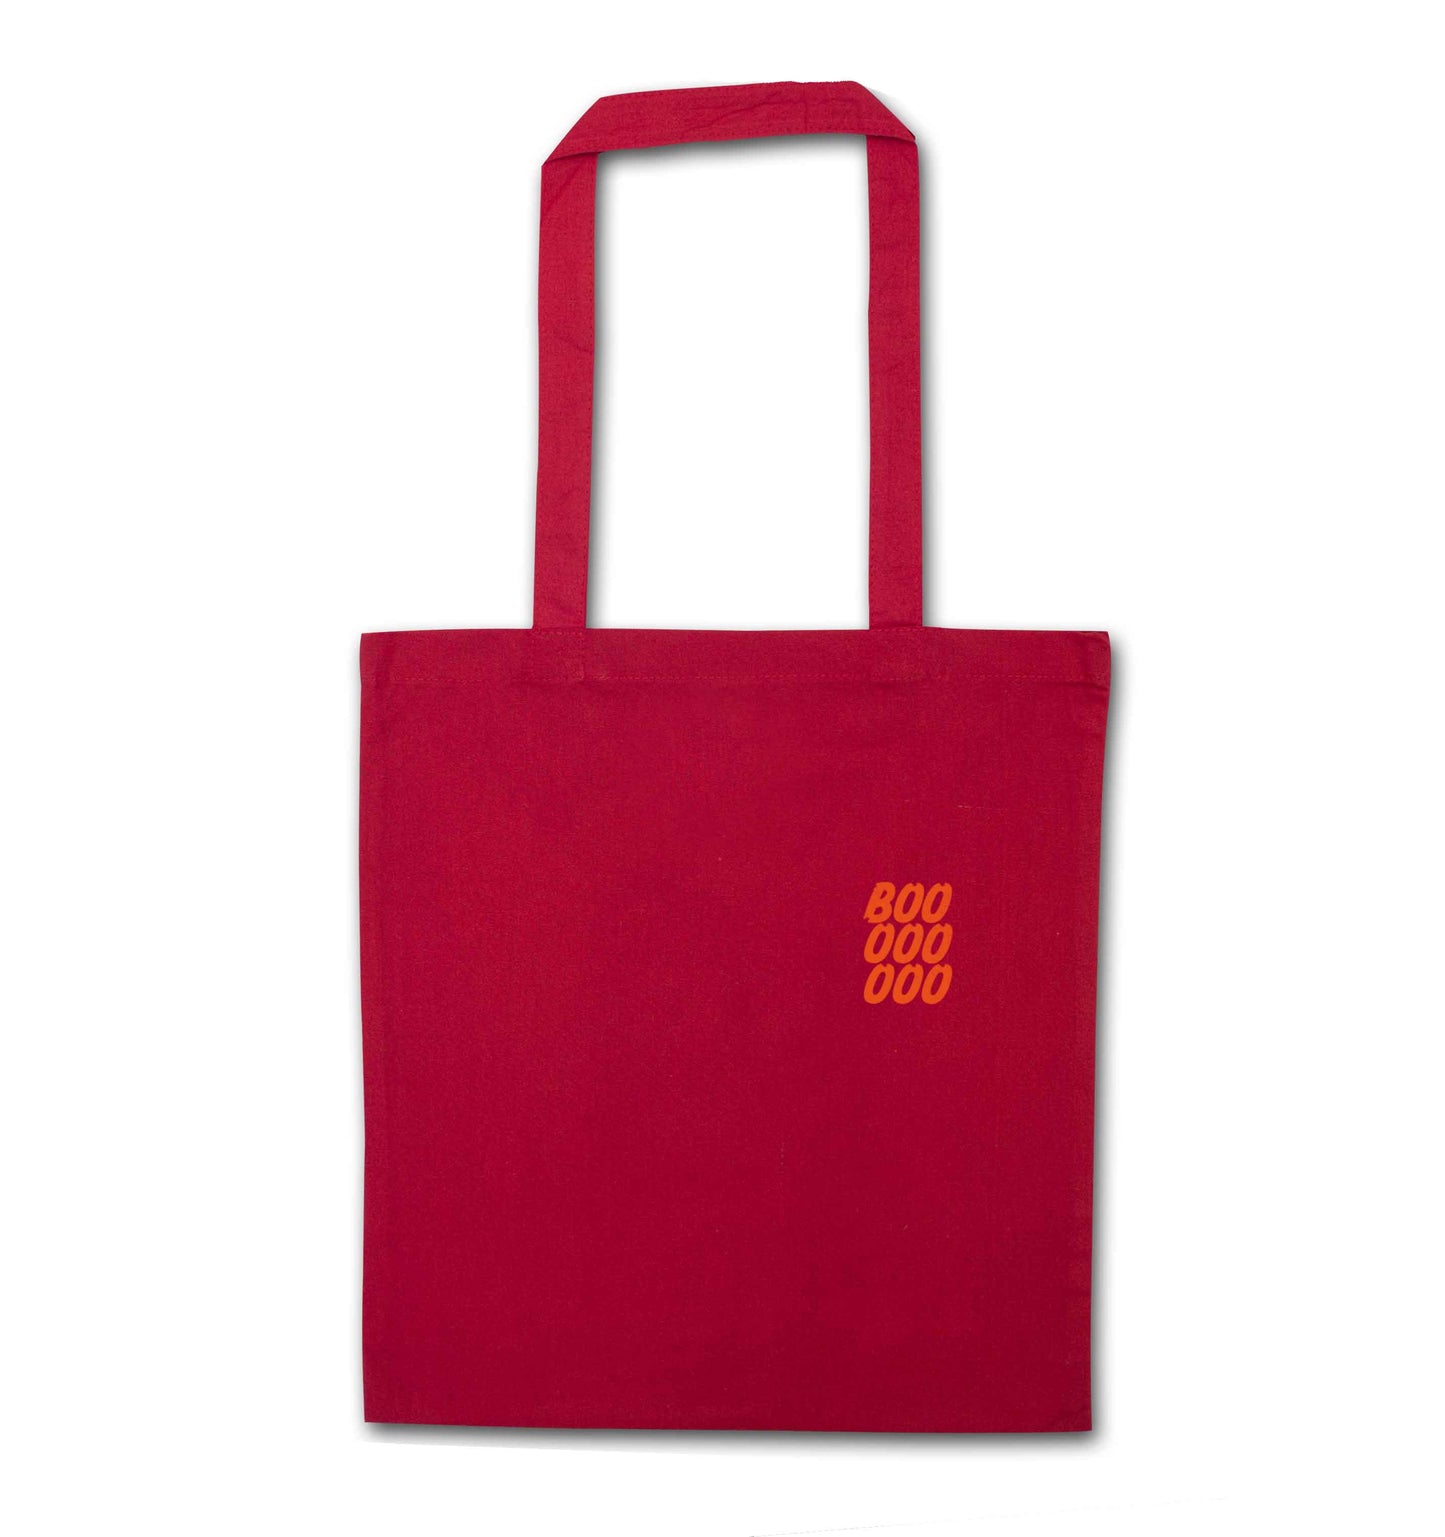 Boo pocket red tote bag